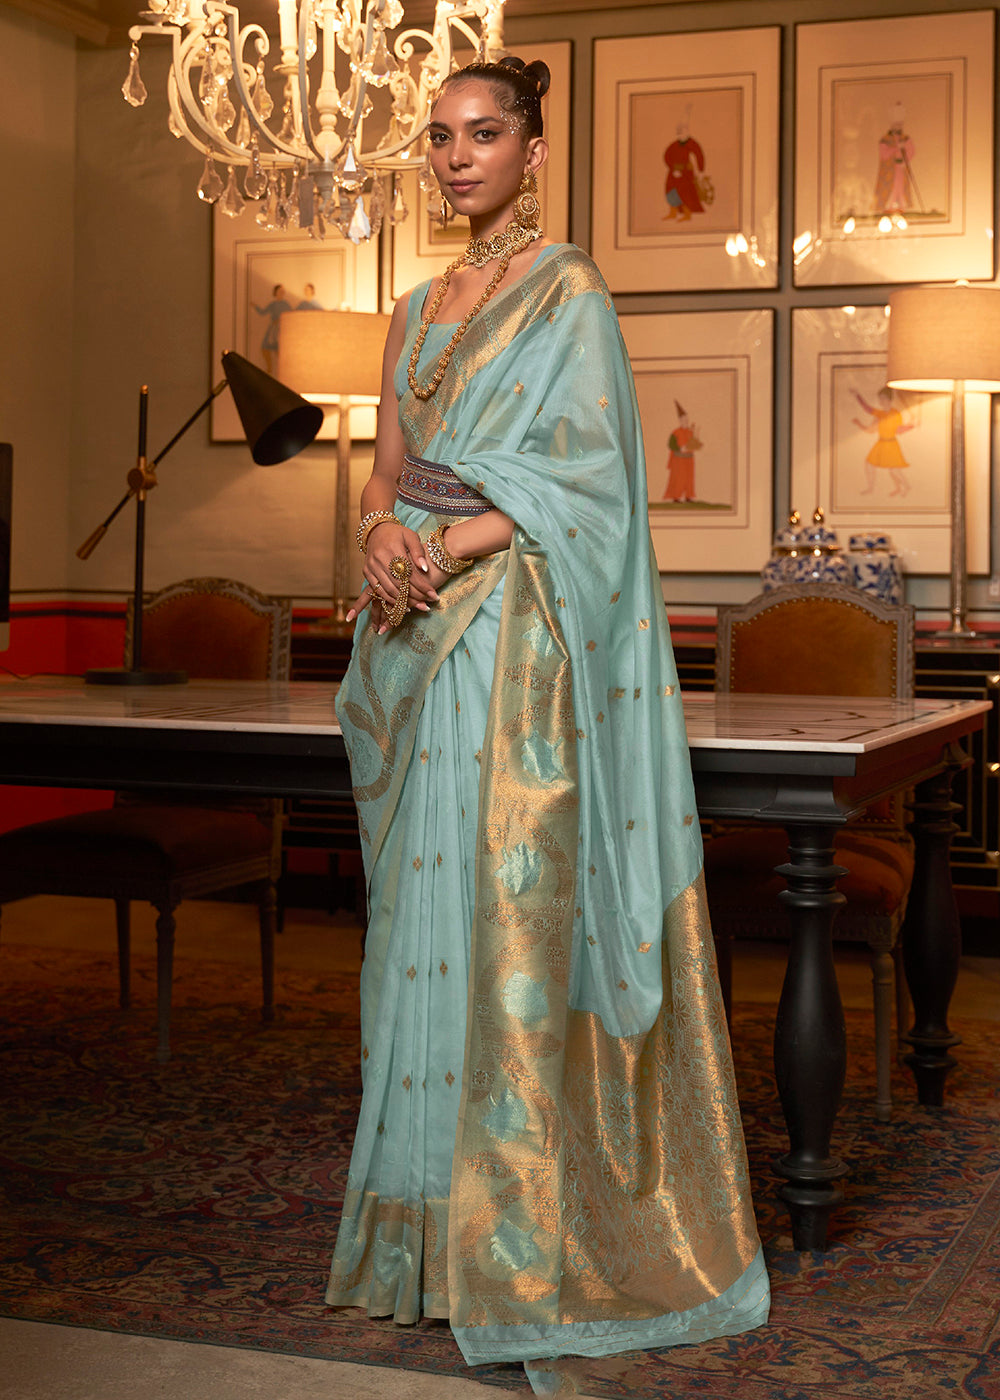 Buy Now Morning Blue Blended Woven Zari Organza Silk Saree Online in USA, UK, Canada & Worldwide at Empress Clothing. 